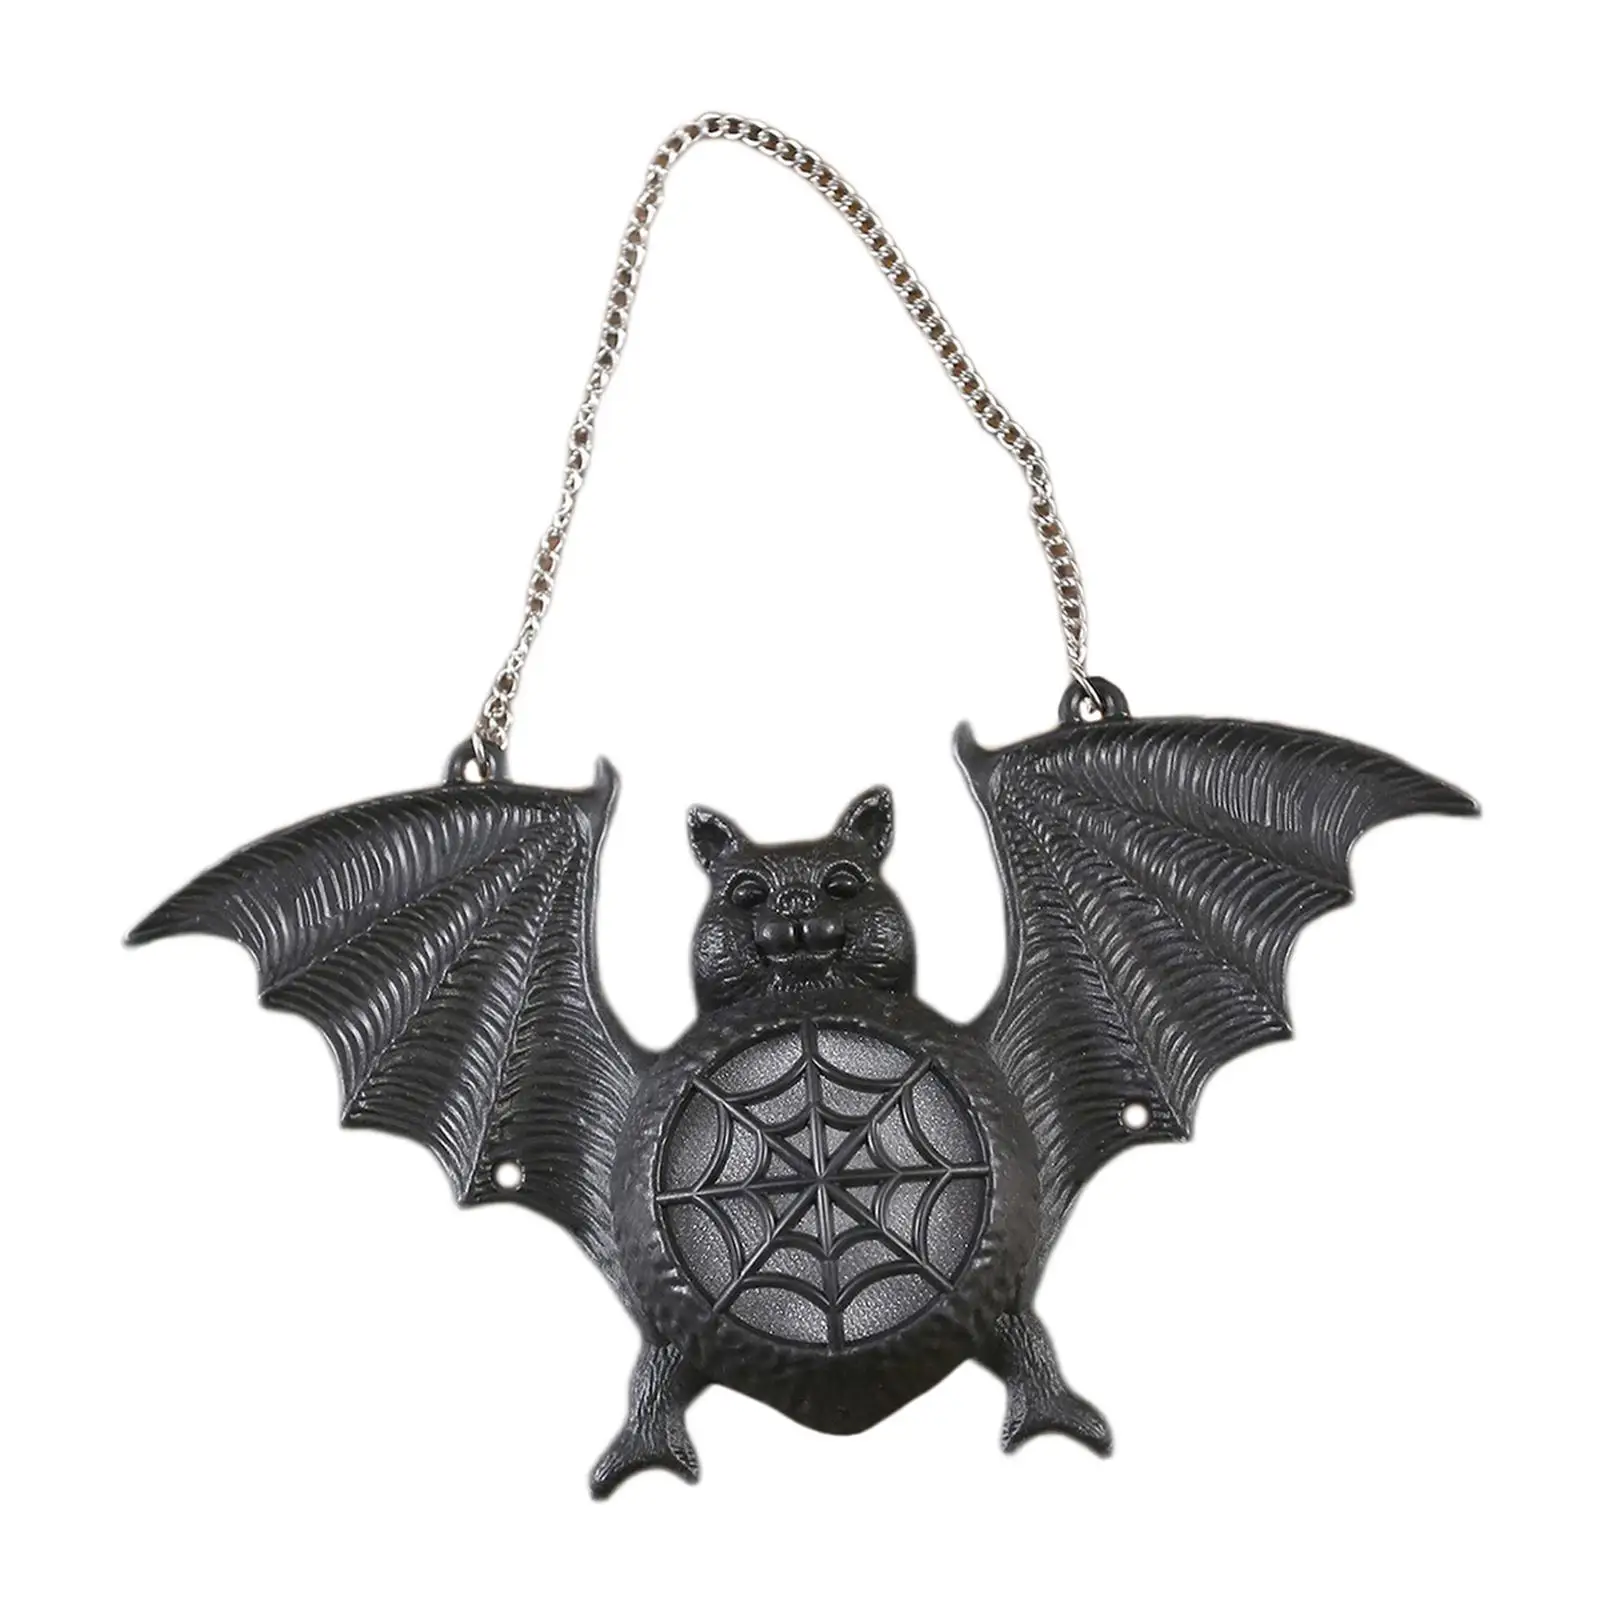 Bat Halloween Decorations Handmade Magical Spooky Pendents Ornaments Decor Horror Hanging Realistic Bat for Birthday Festival images - 6